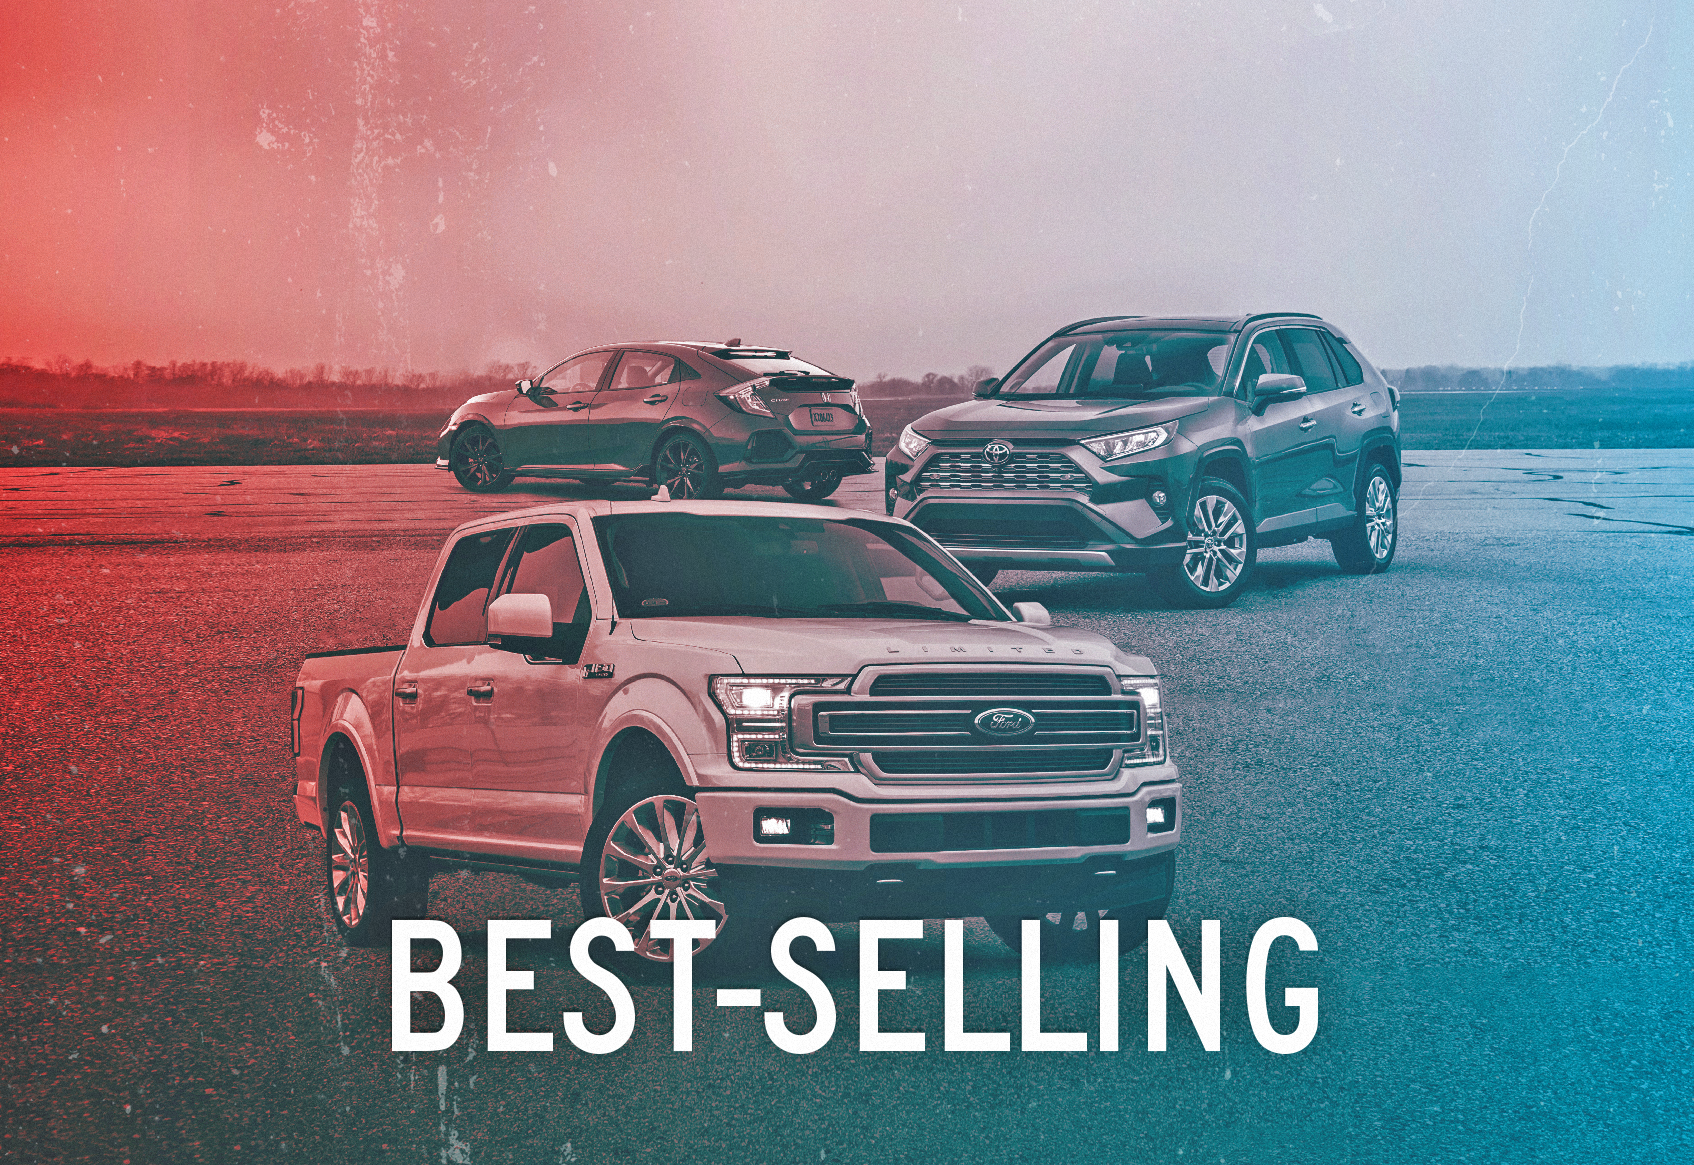 25 Bestselling Cars, Trucks, and SUVs of 2020